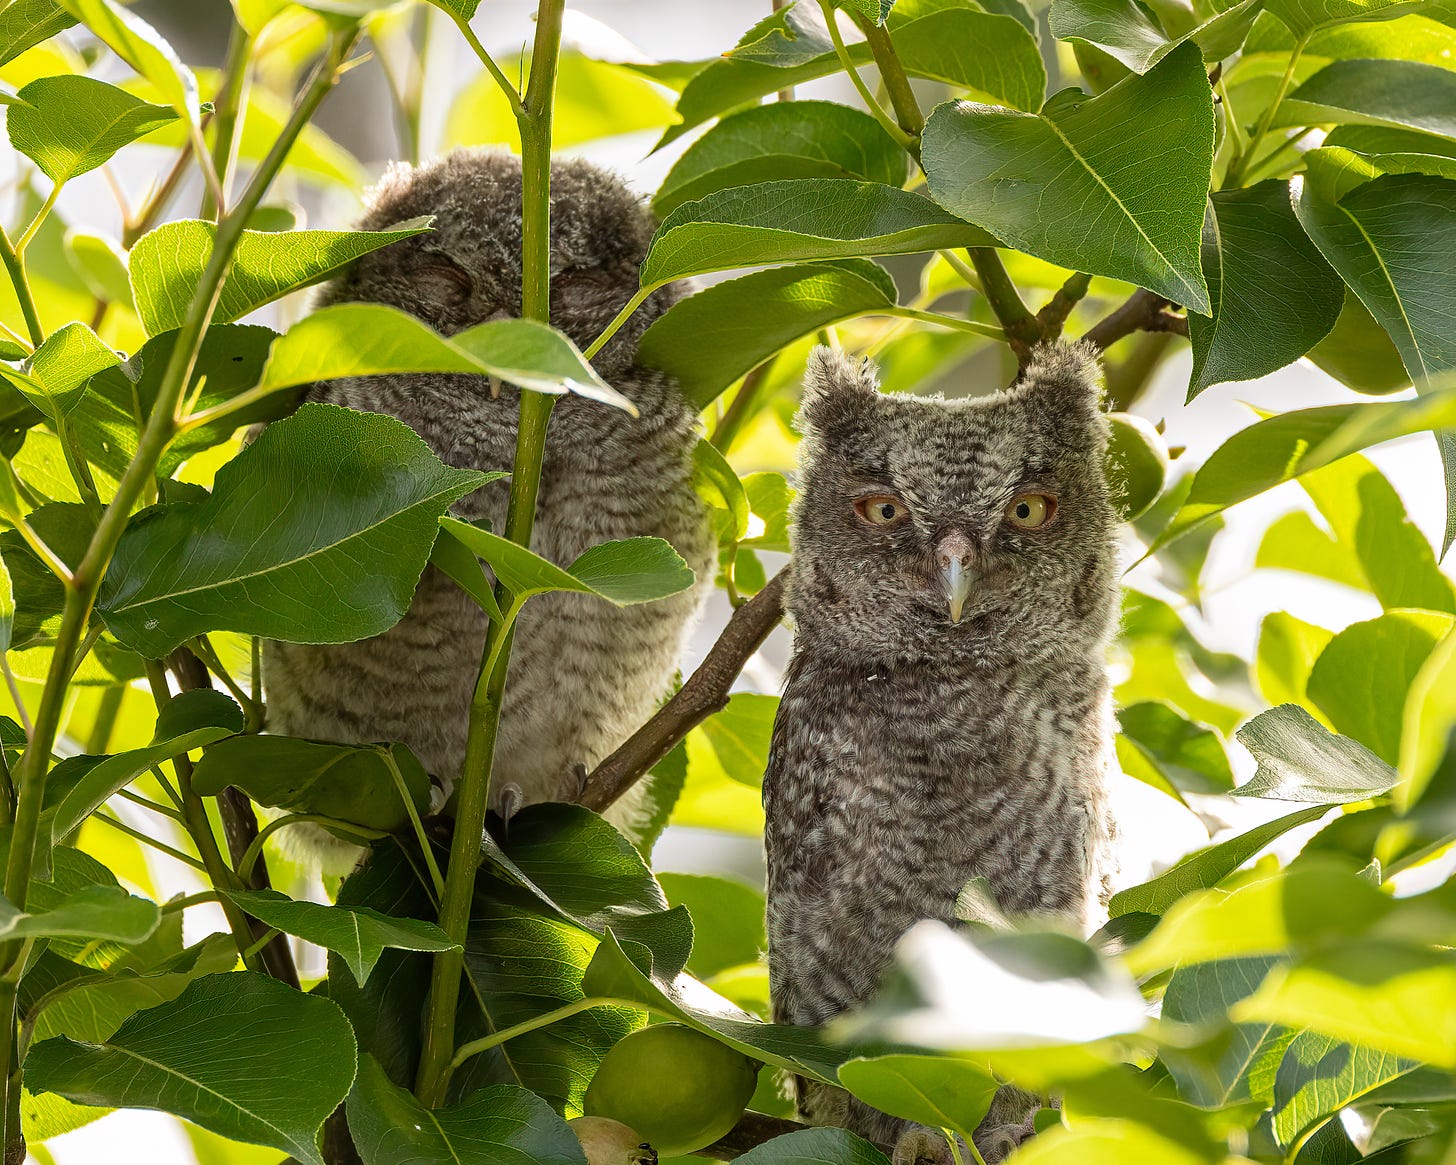 Two fledgling owls sit on a branch in the pear tree. One is alert and has adopted a defensive posture, sitting erect in a manner that makes its body very skinny. His ears are upright. Perhaps he's trying to blend in with the tree branches. His sibling is sleeping on a branch six inches away. Eyes are close, and his body is a soft, relaxed, round shape.